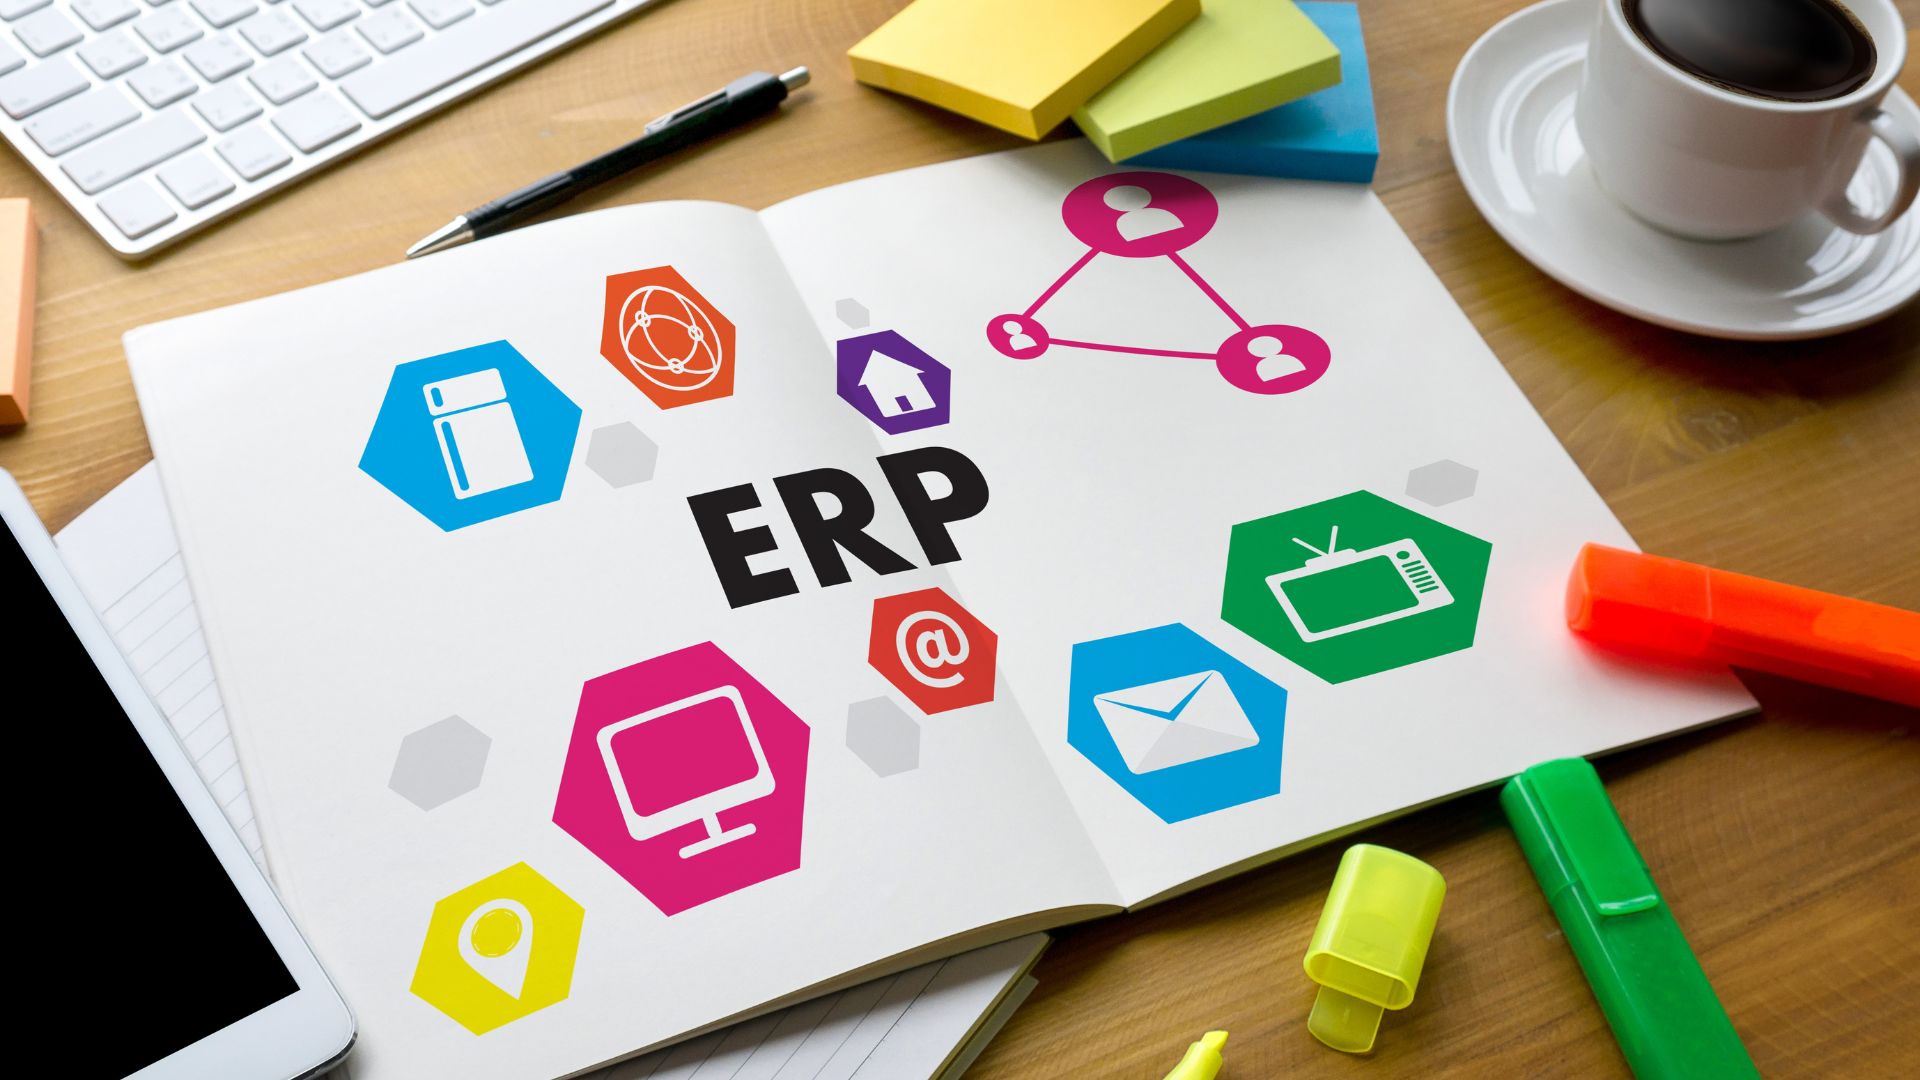 Know when to upgrade to ERP